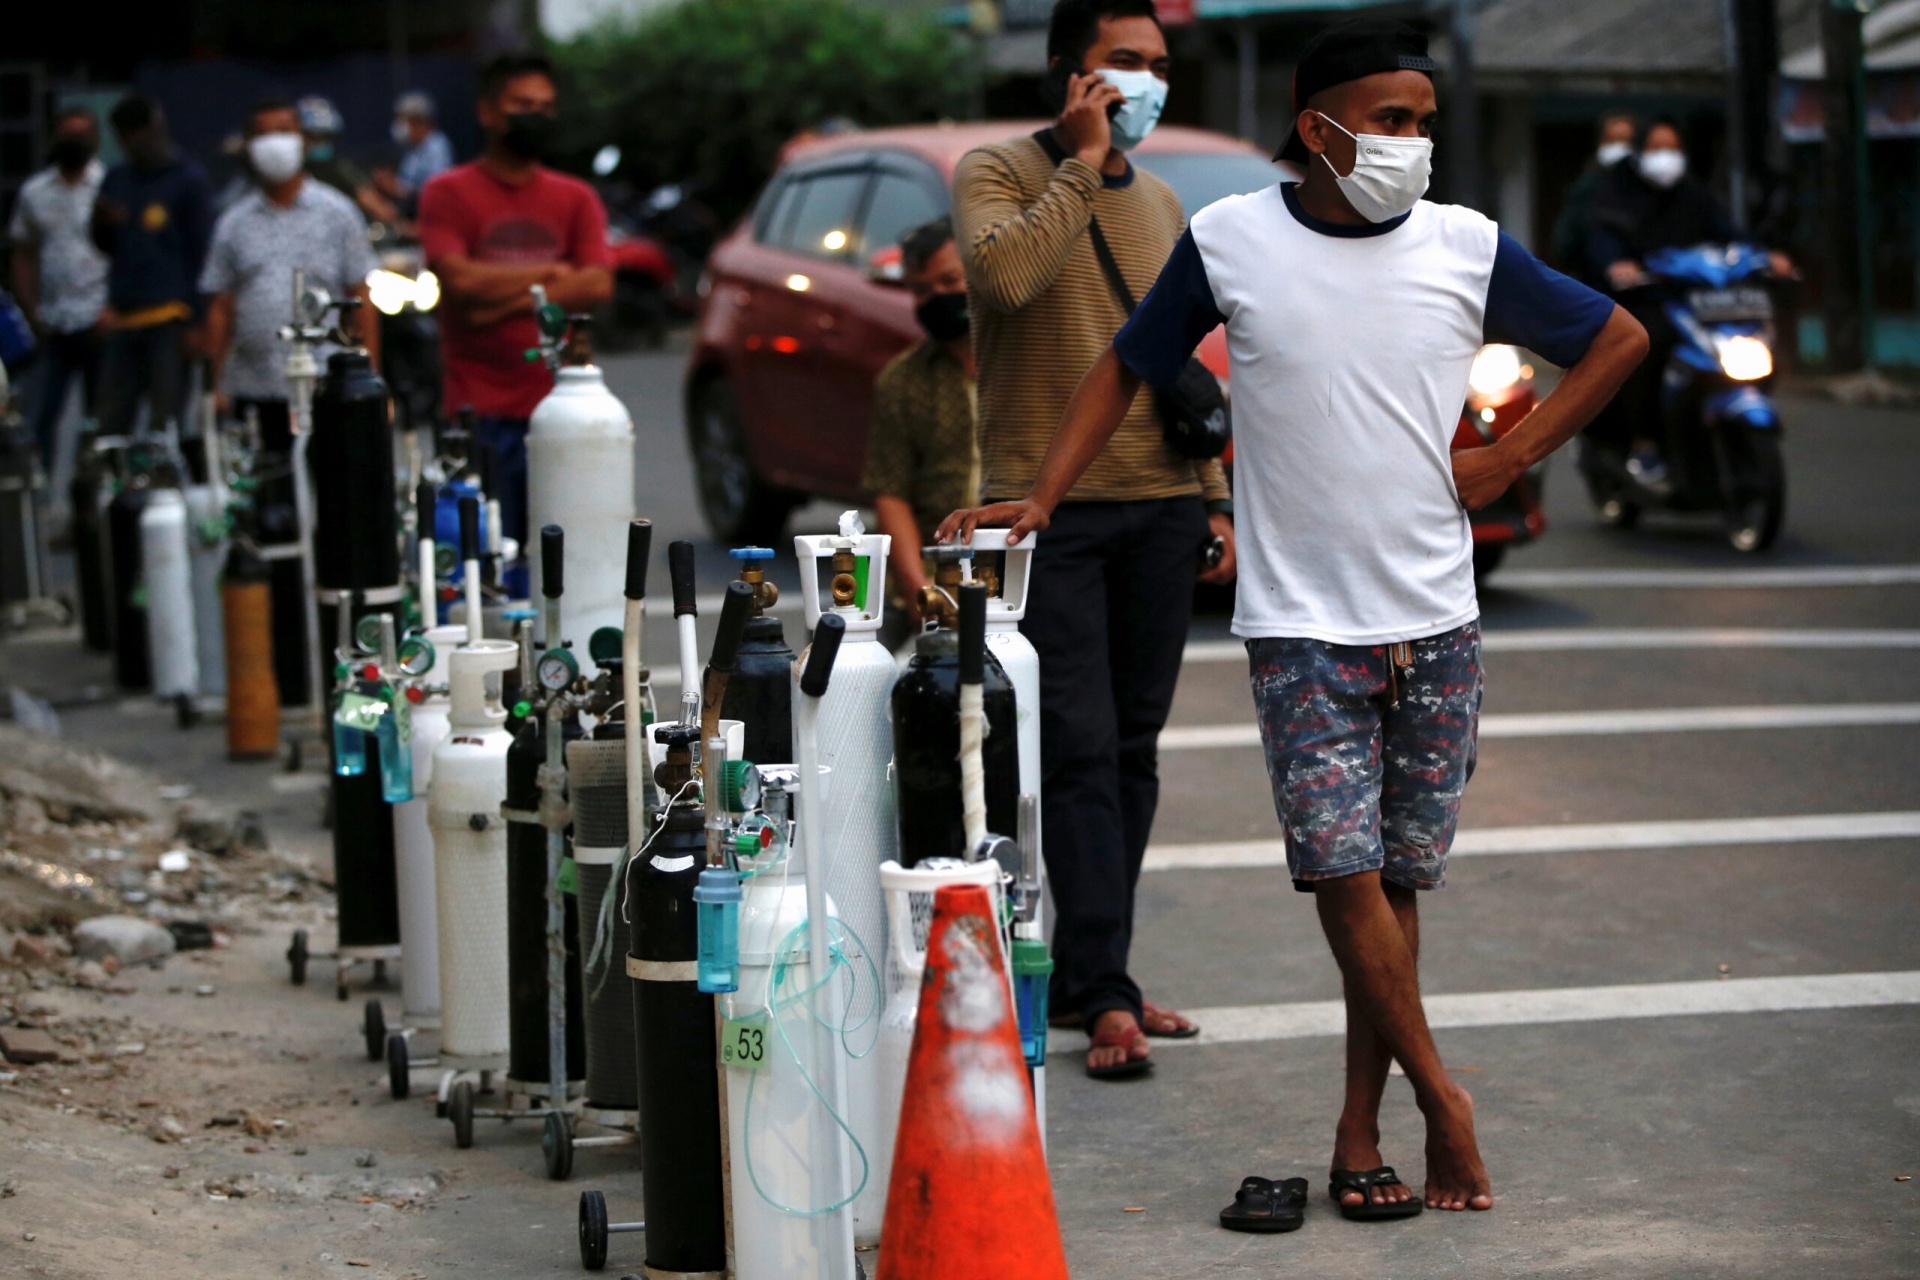 People queue to refill oxygen tanks as Indonesia experiences an oxygen supply shortage. Photo Reuters